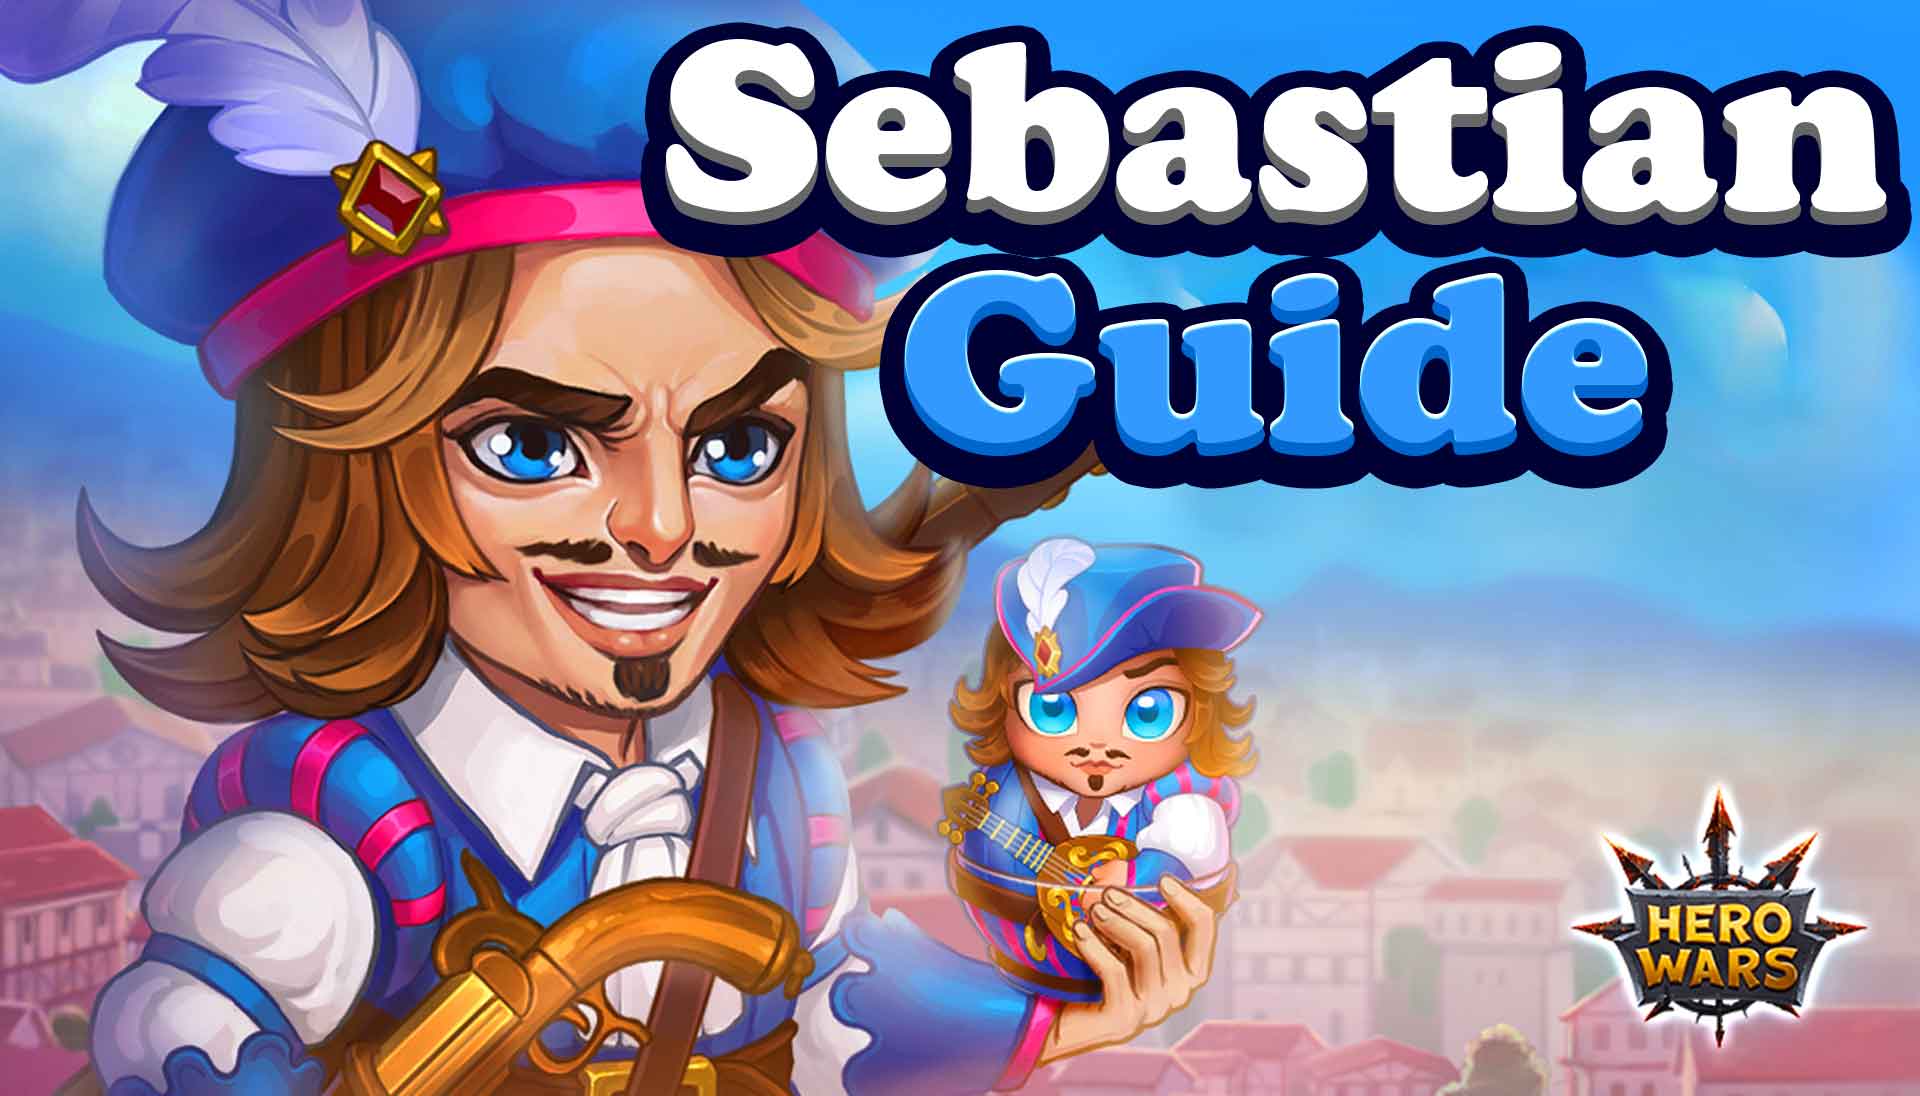 You are currently viewing Hero Wars Sebastian Guide